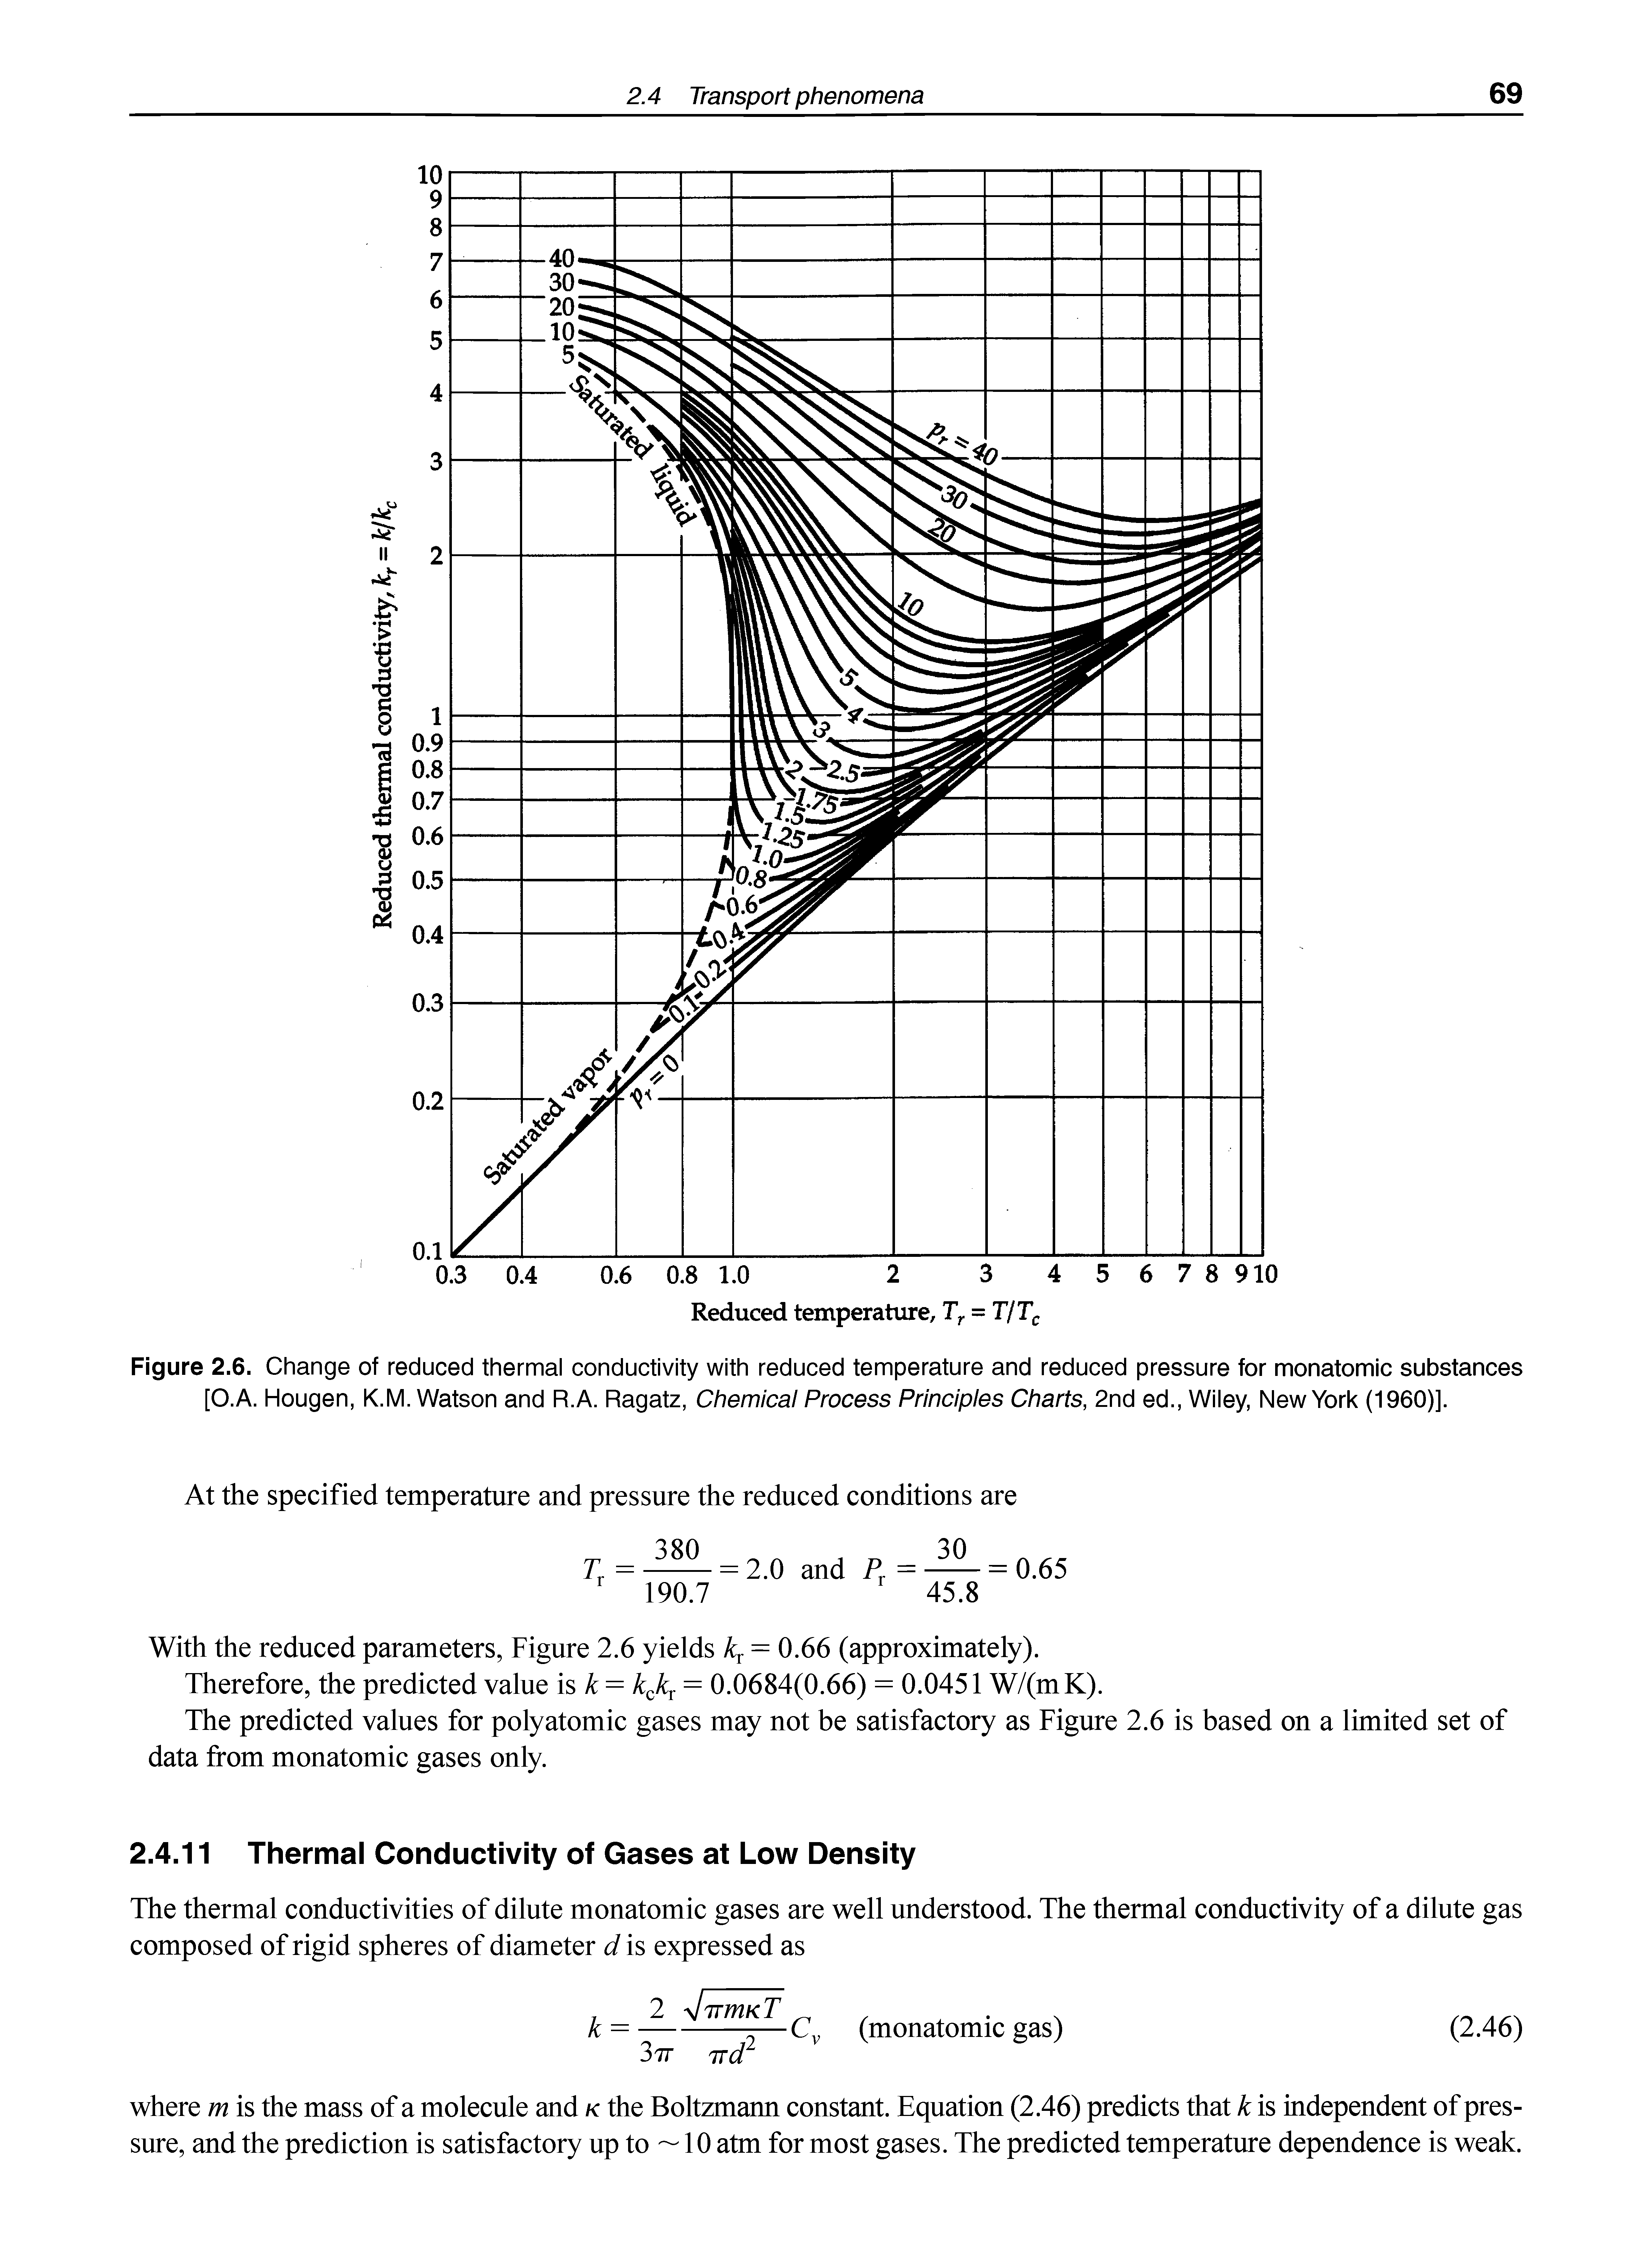 Figure 2.6. Change of reduced thermal conductivity with reduced temperature and reduced pressure for monatomic substances [O.A. Hougen, K.M. Watson and R.A. Ragatz, Chemical Process Principles Charts, 2nd ed., Wiley, New York (I960)].